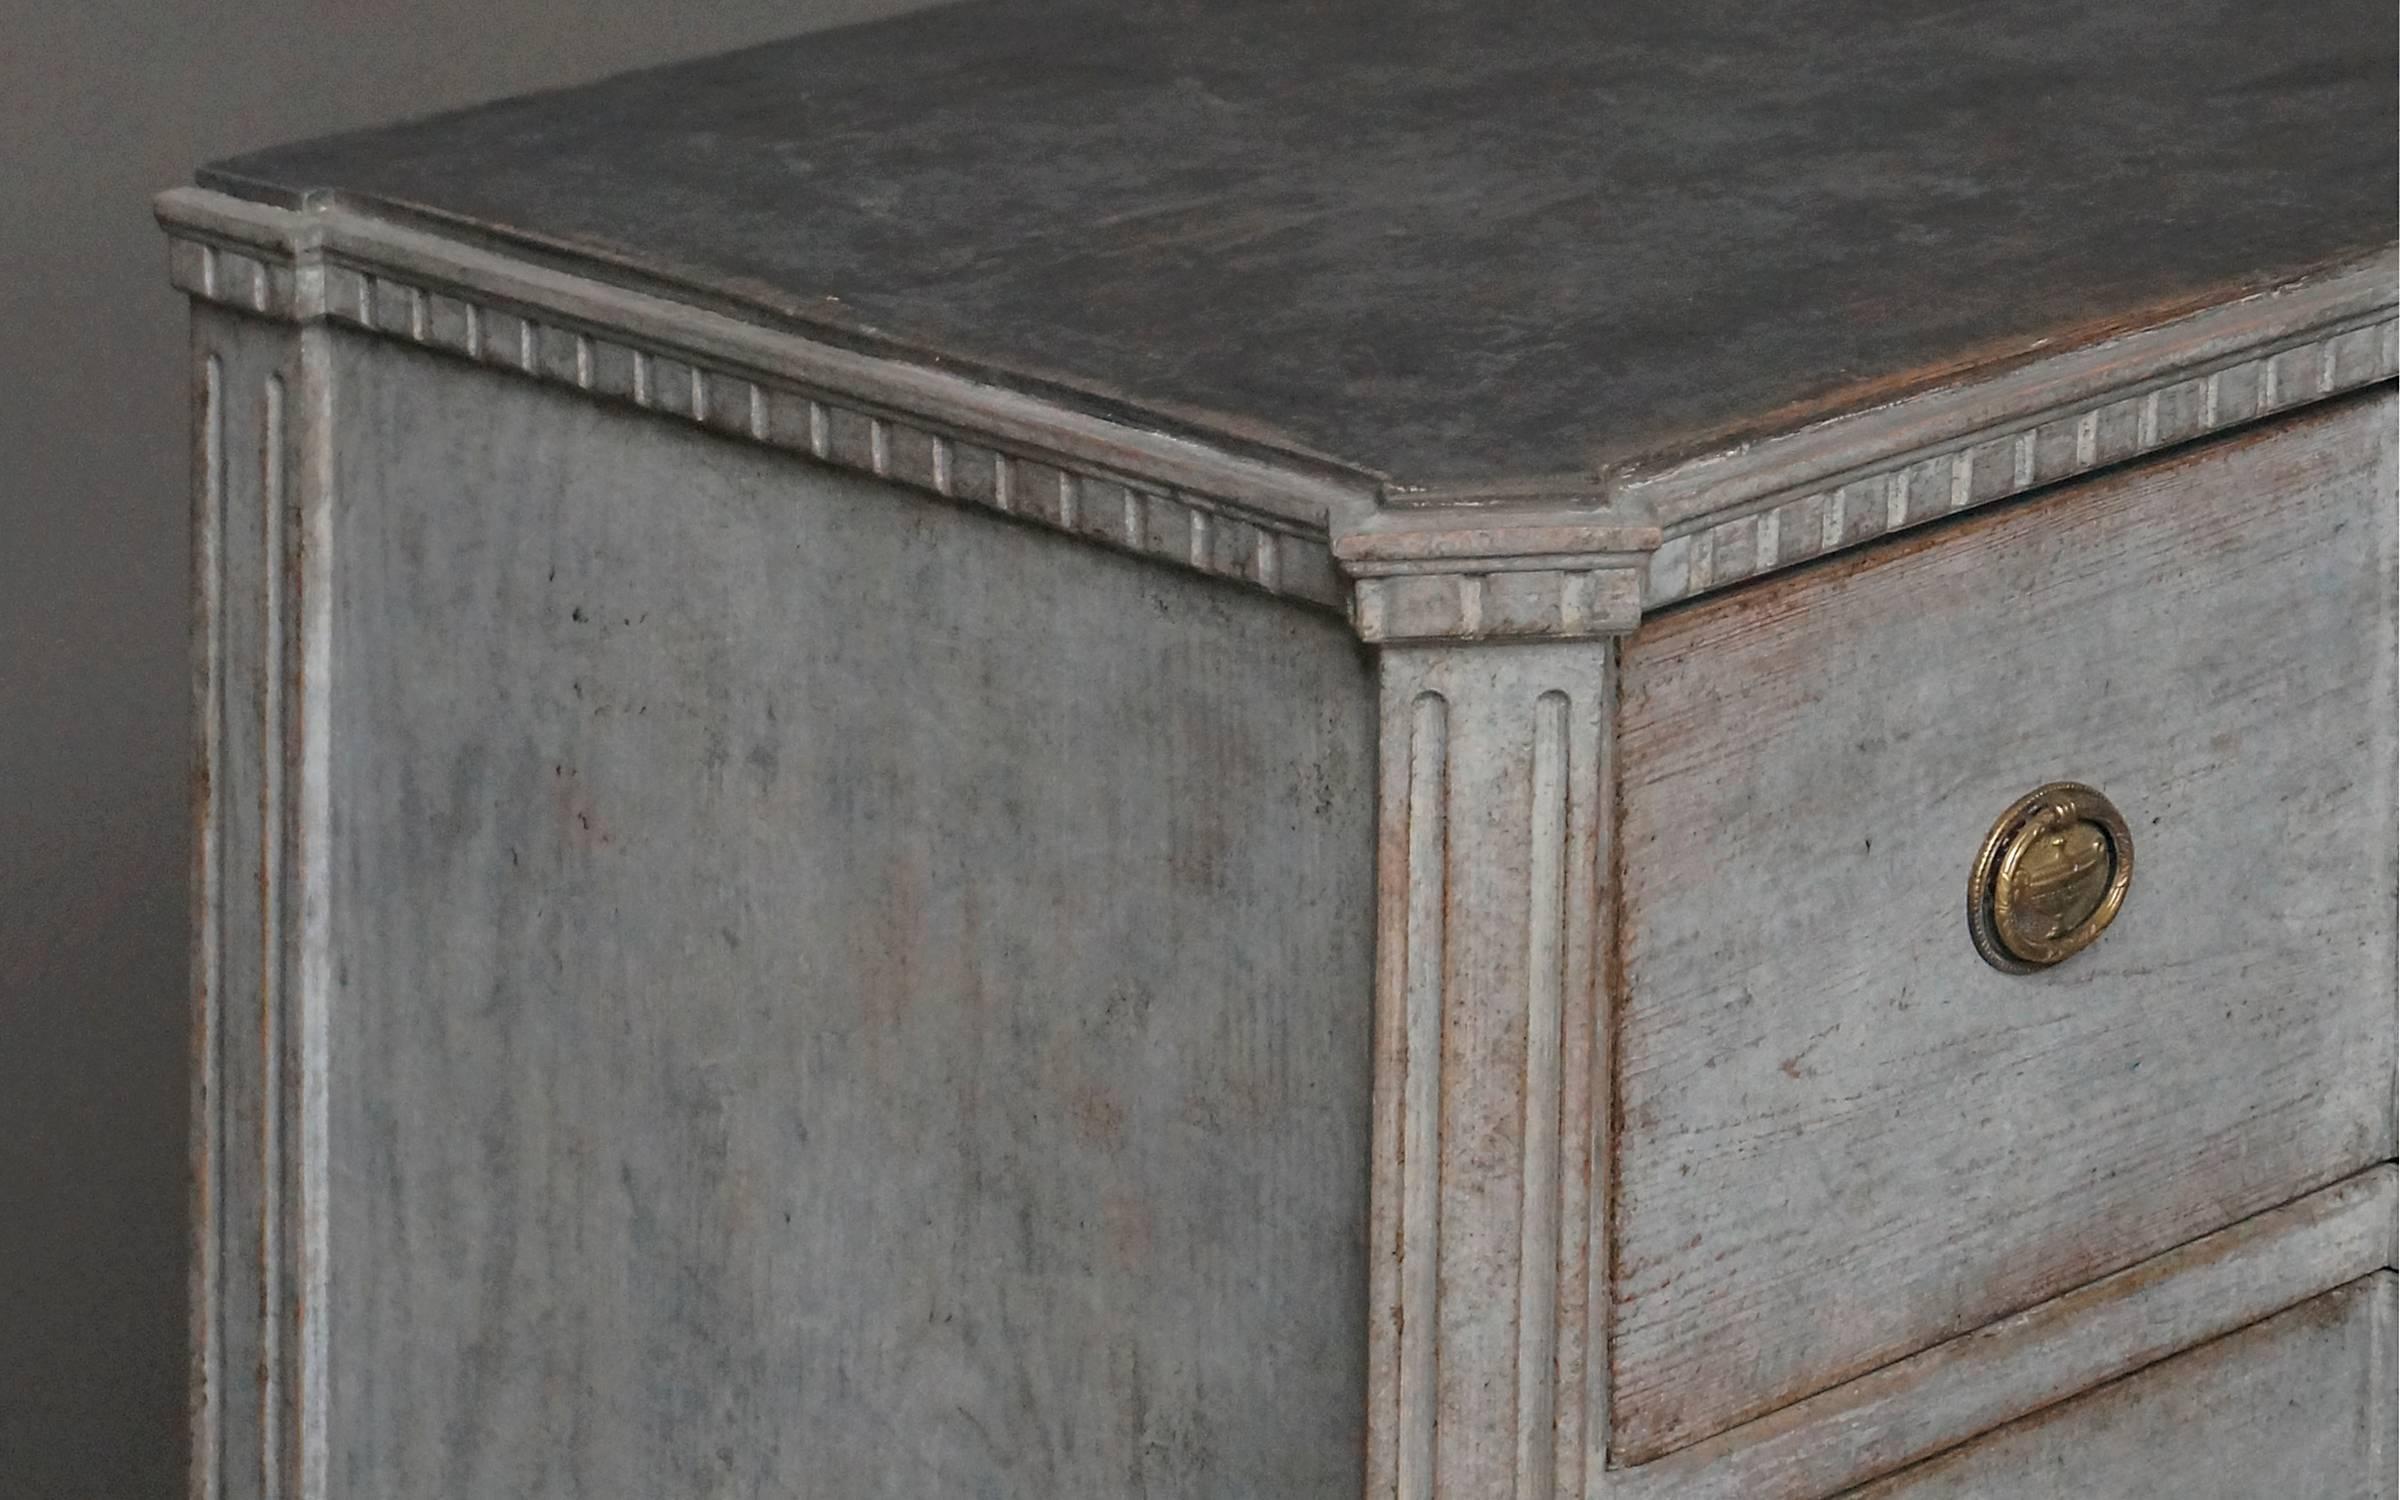 Hand-Carved Gustavian Style Commode in Worn Gray Paint